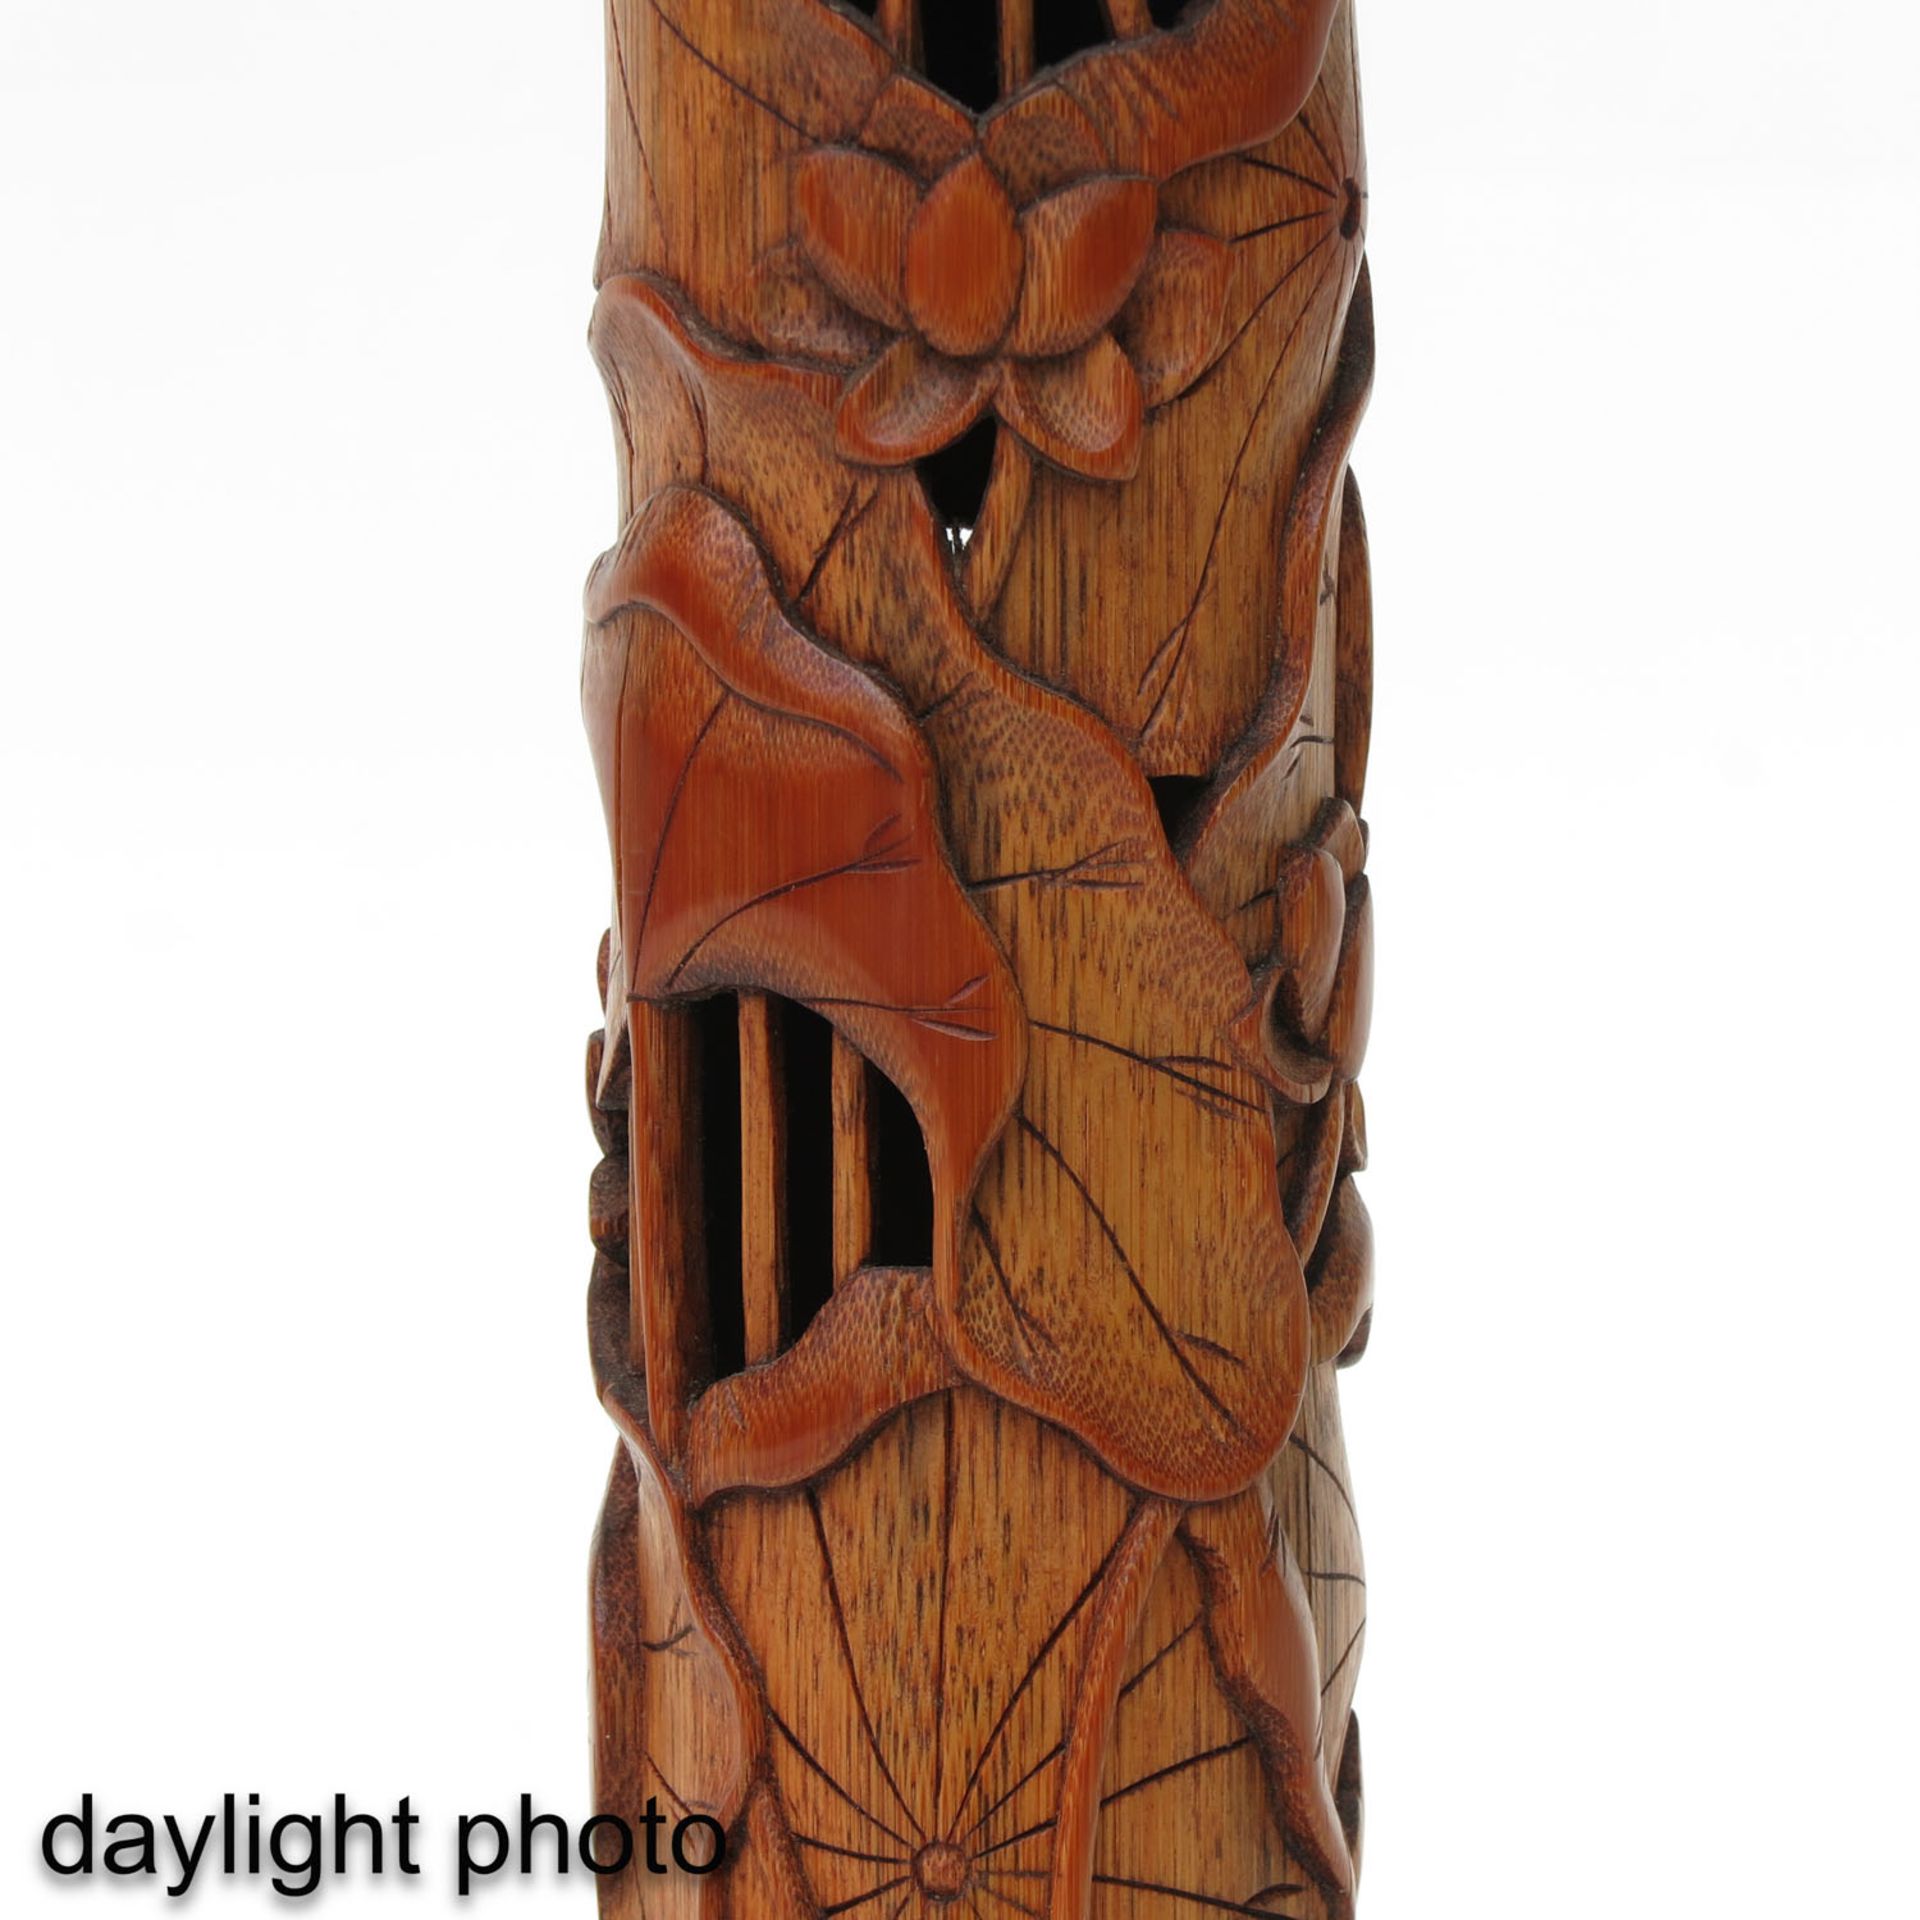 A Carved Wood Sculpture - Image 9 of 9